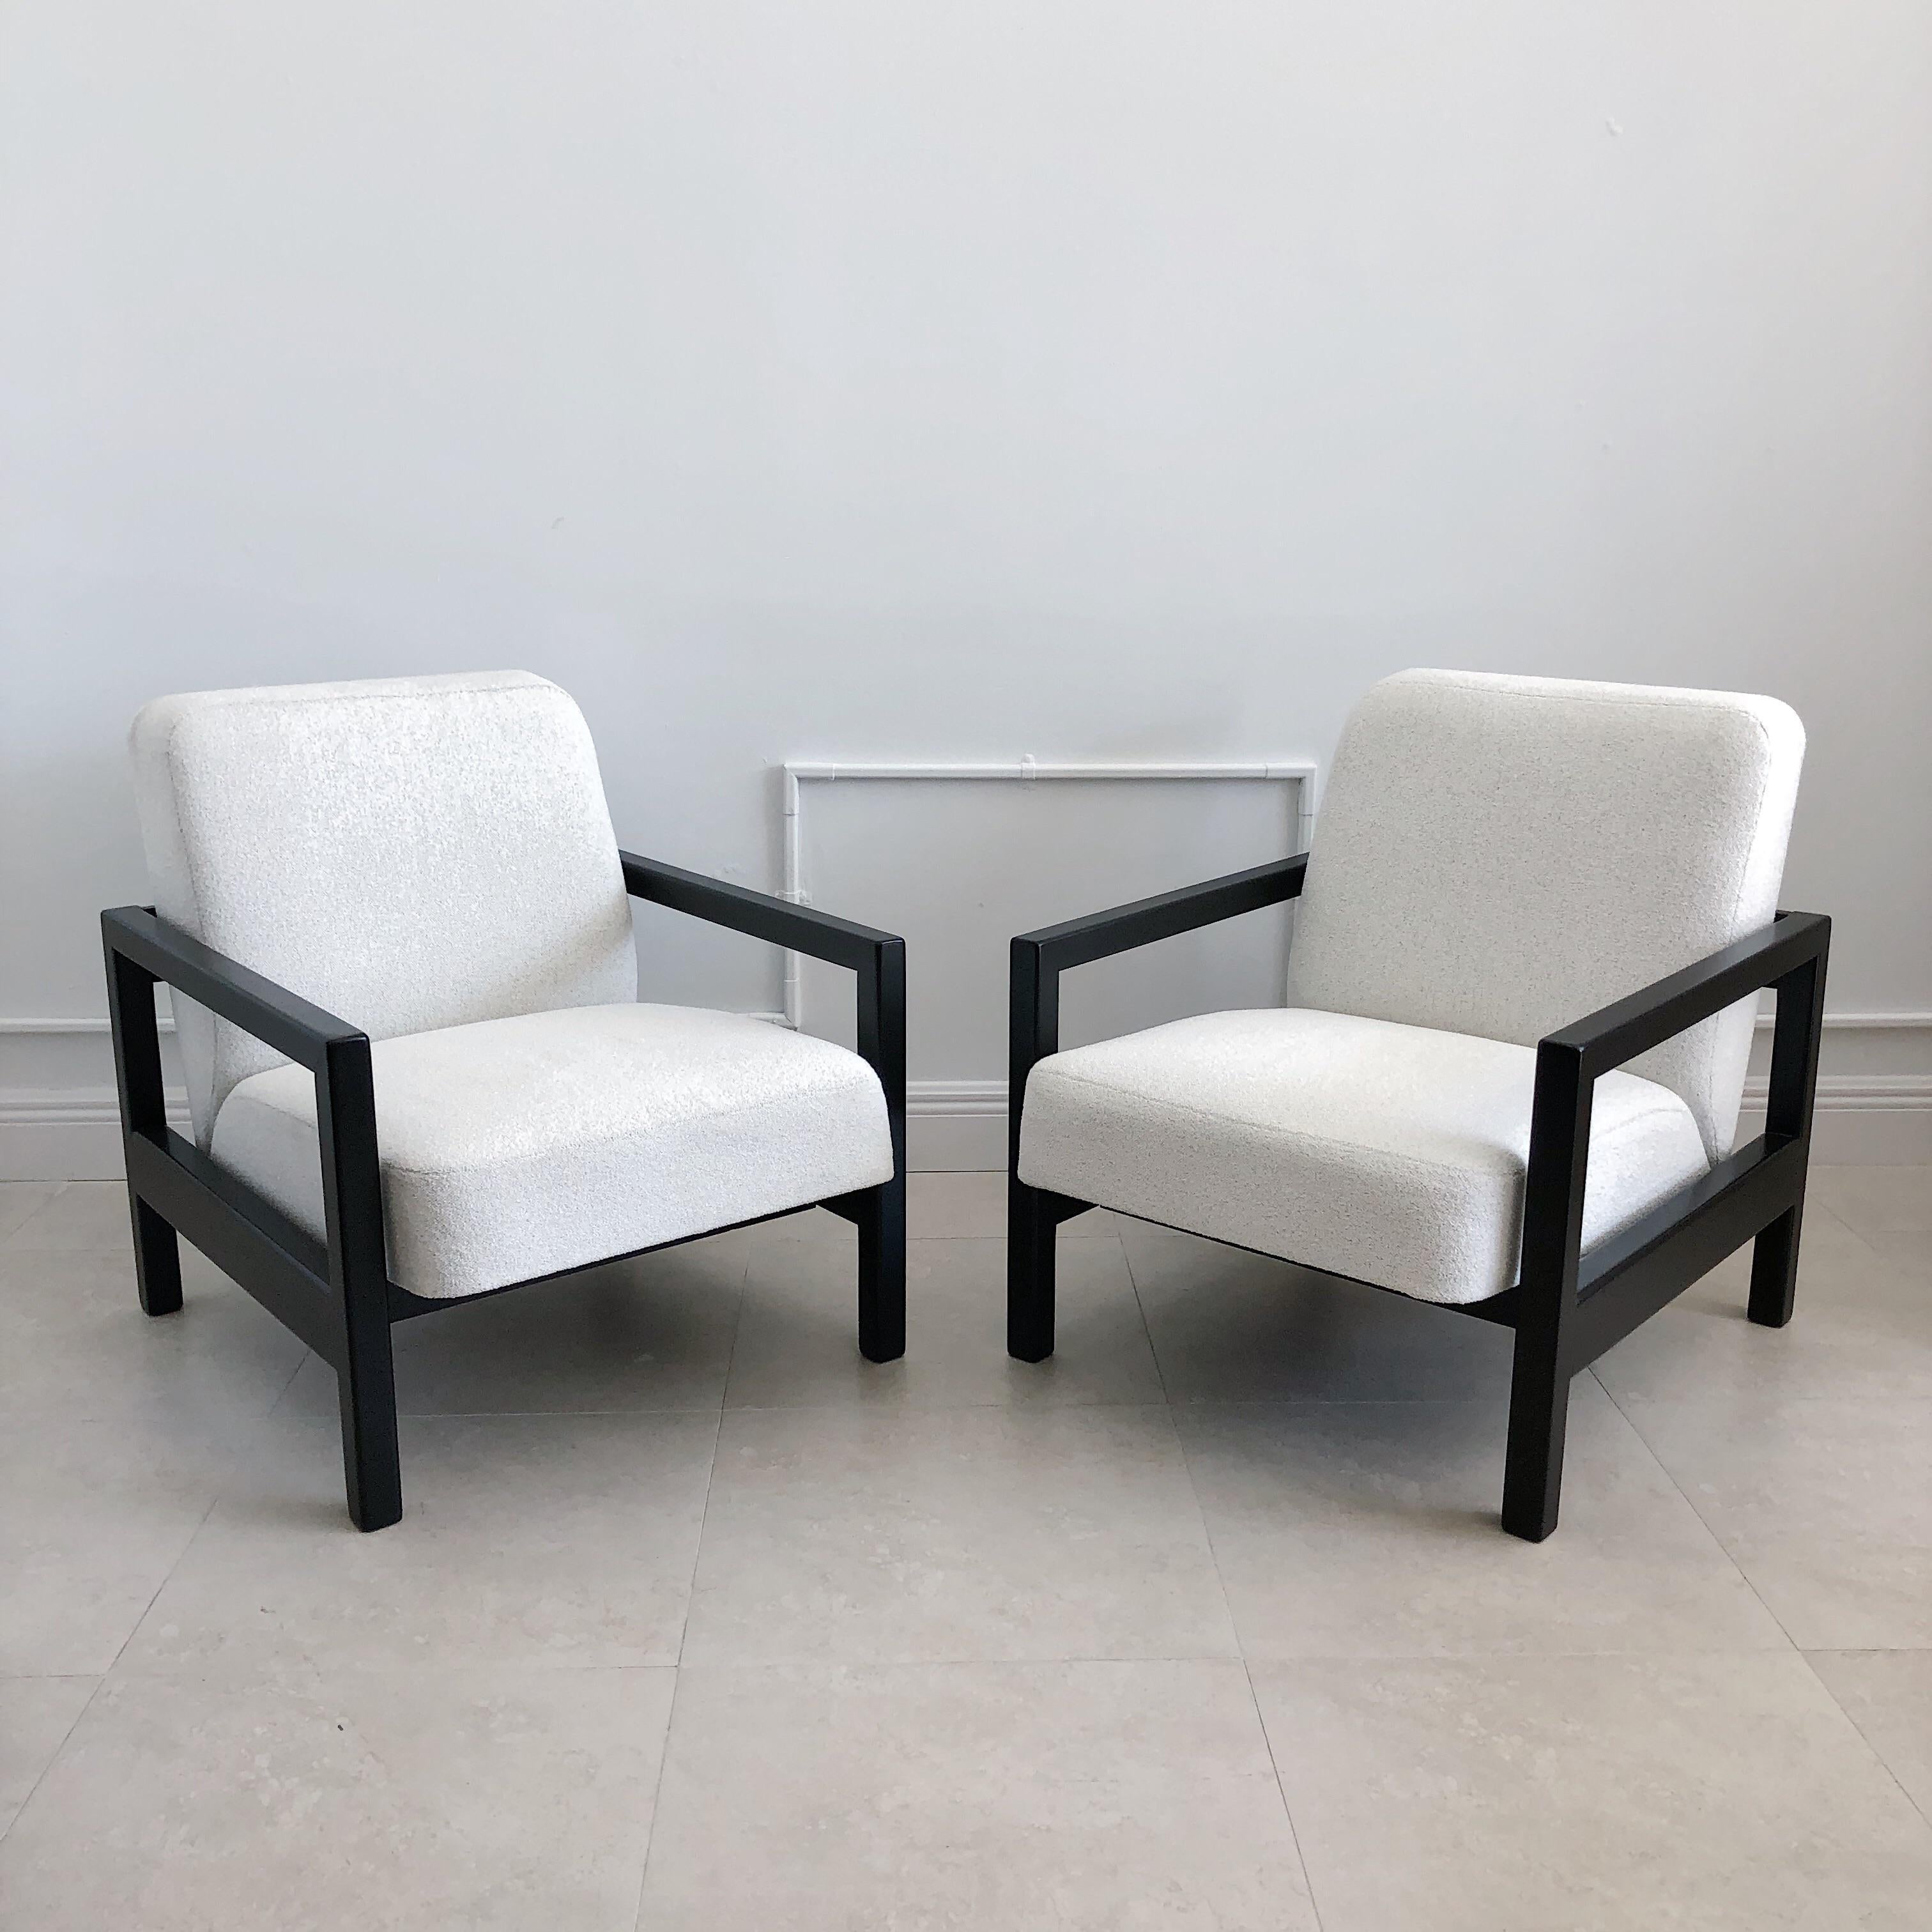 Saint Pierre and Miquelon Vintage 1950's George Nelson for Herman Miller, Model 4774 Armchairs, a Pair